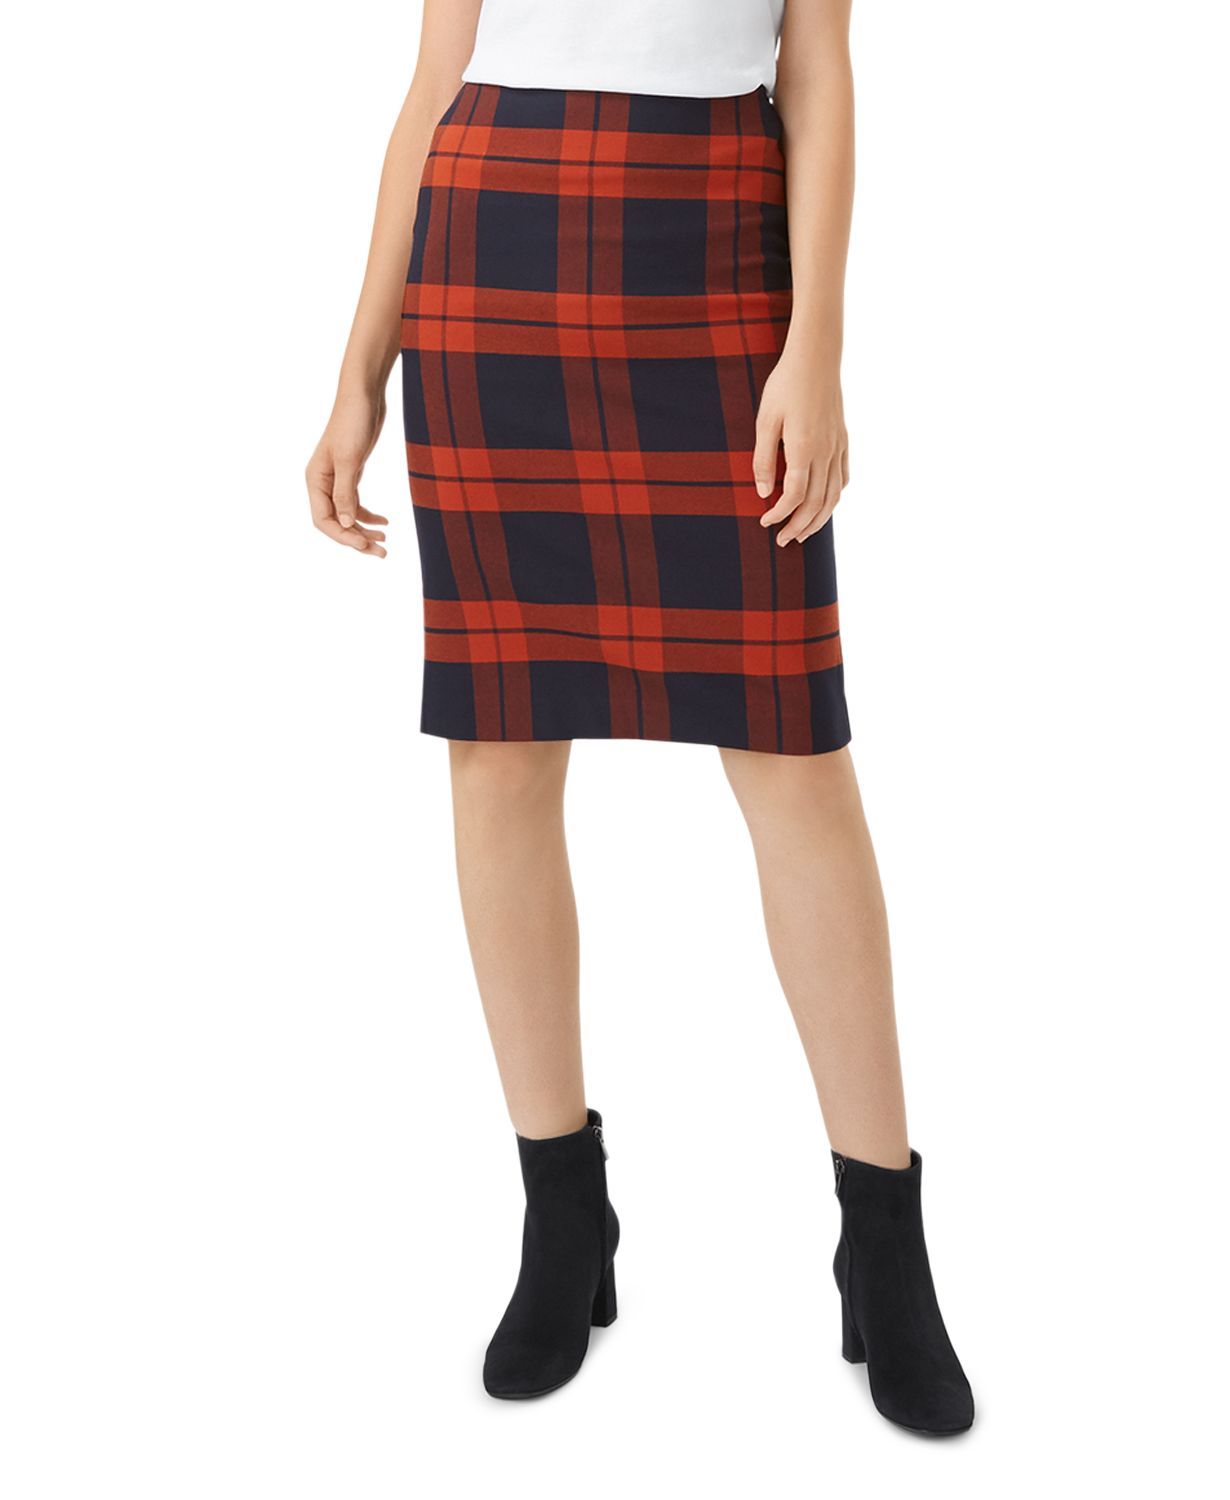 white plaid skirt outfit